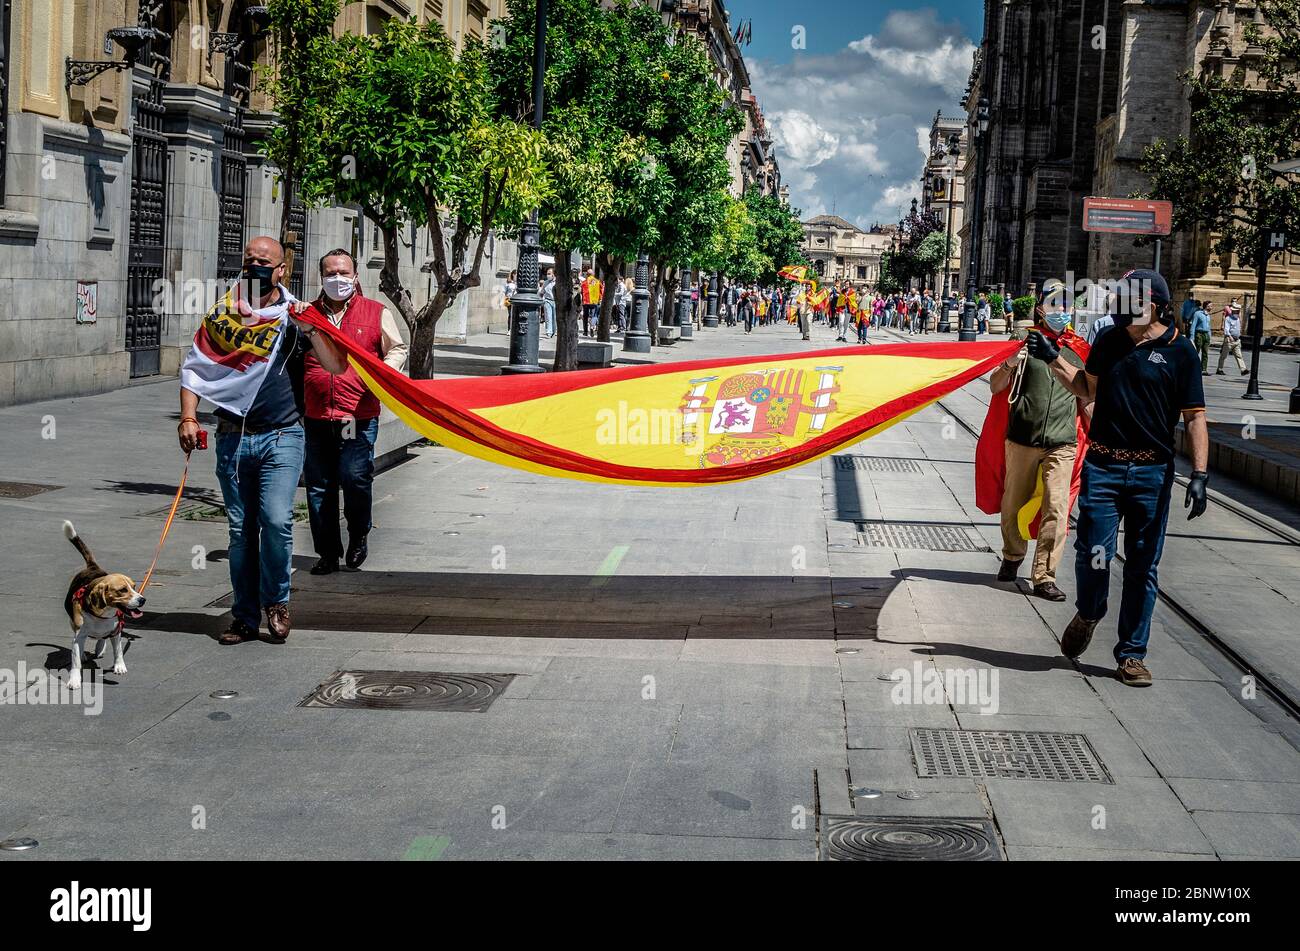 Street demonstration of Spain's far-right party Vox voters during the coronavirus pandemic. Selective focus on the shi Stock Photo